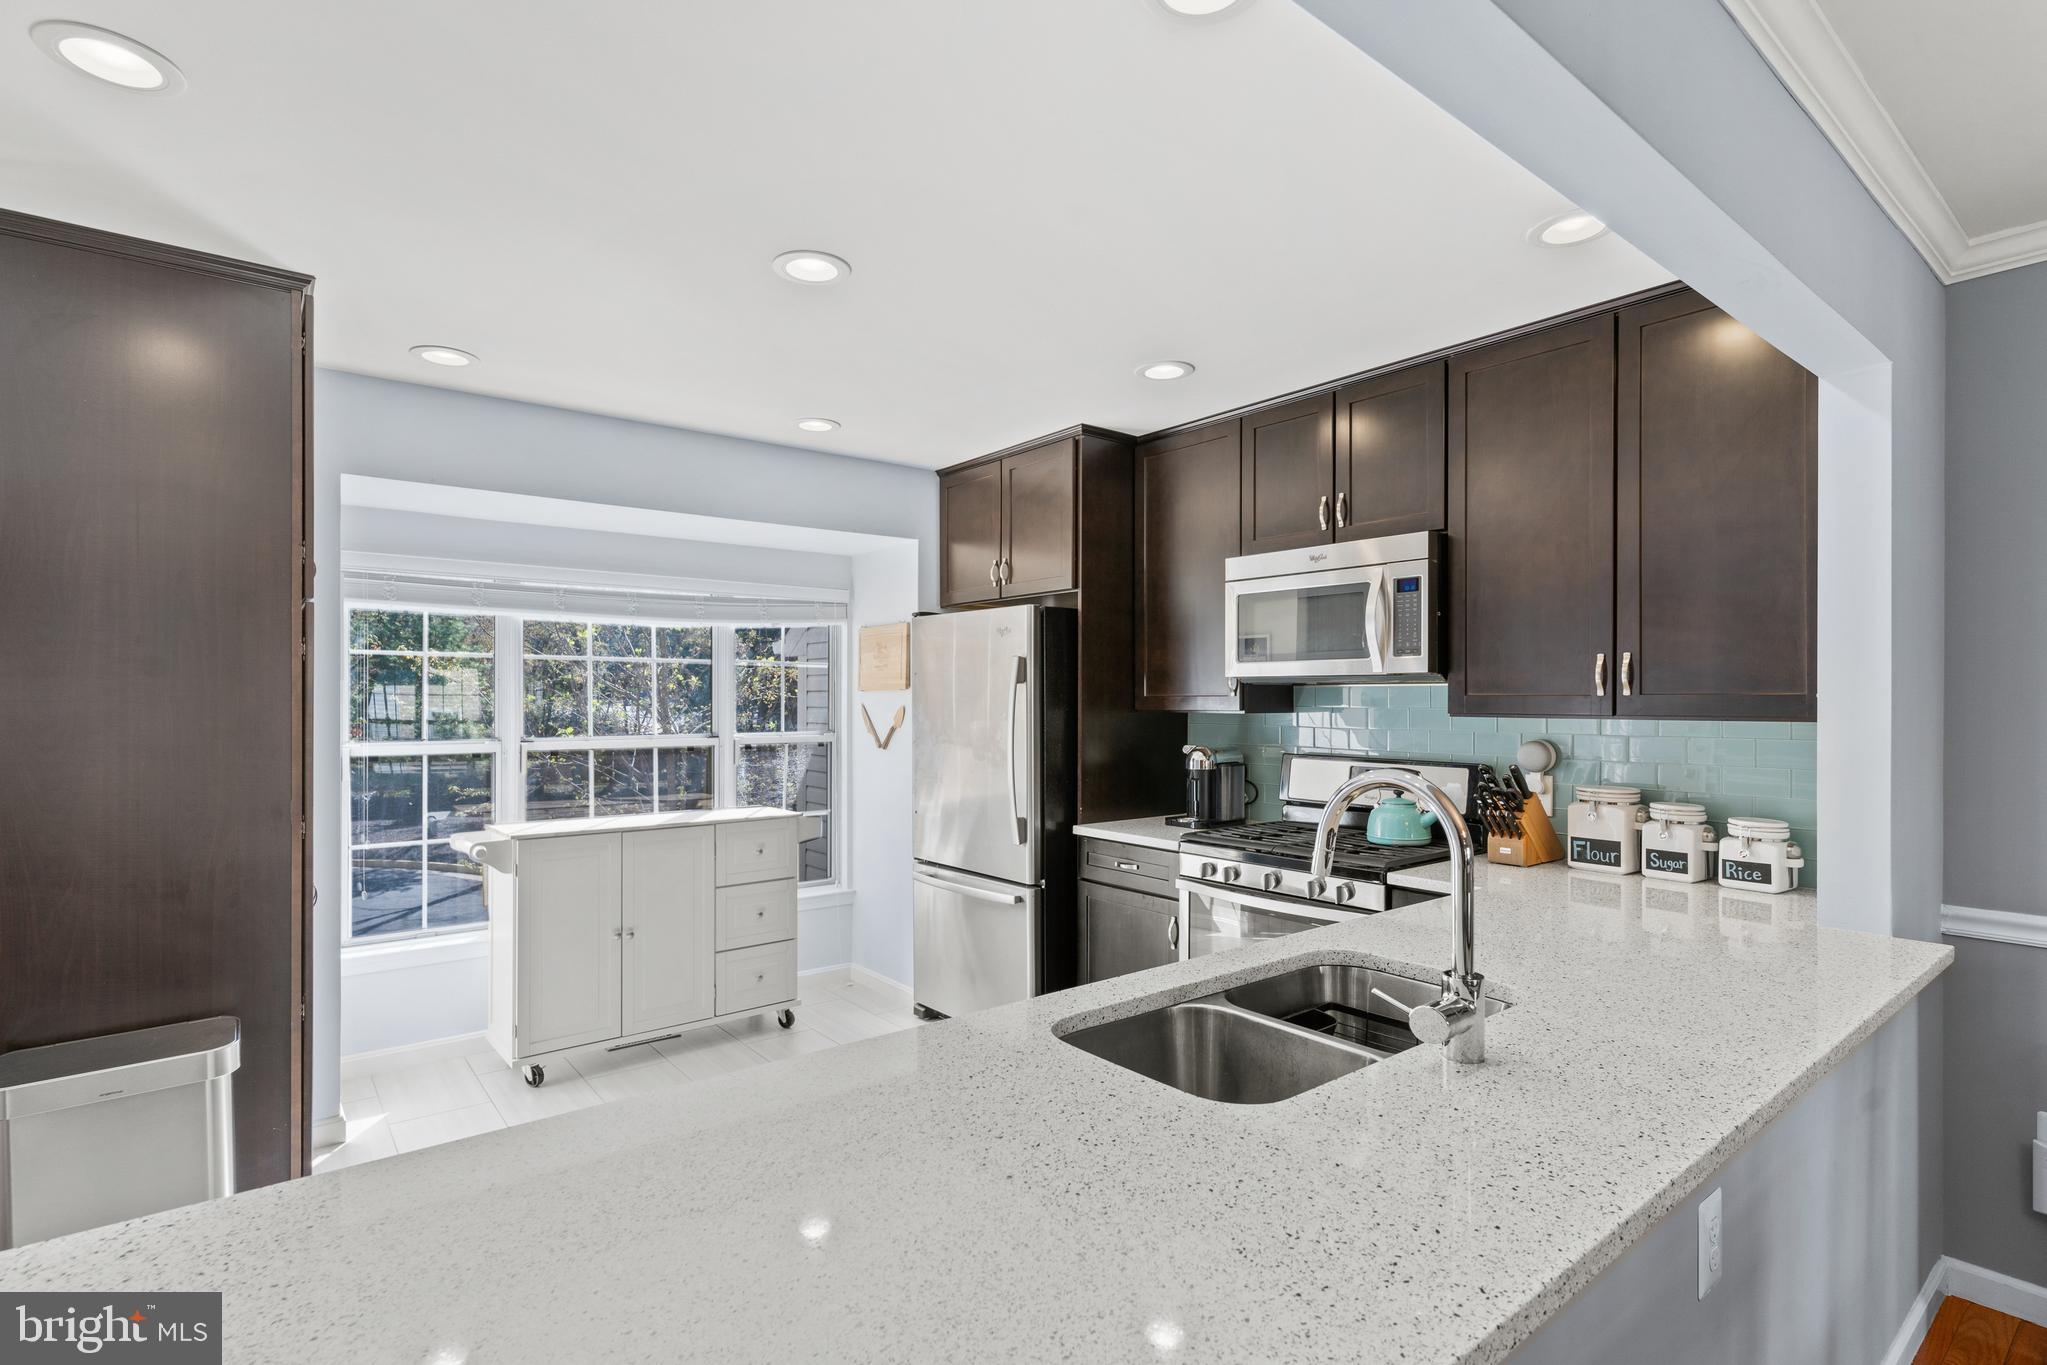 a kitchen that has a sink cabinets counter space stainless steel appliances and a window